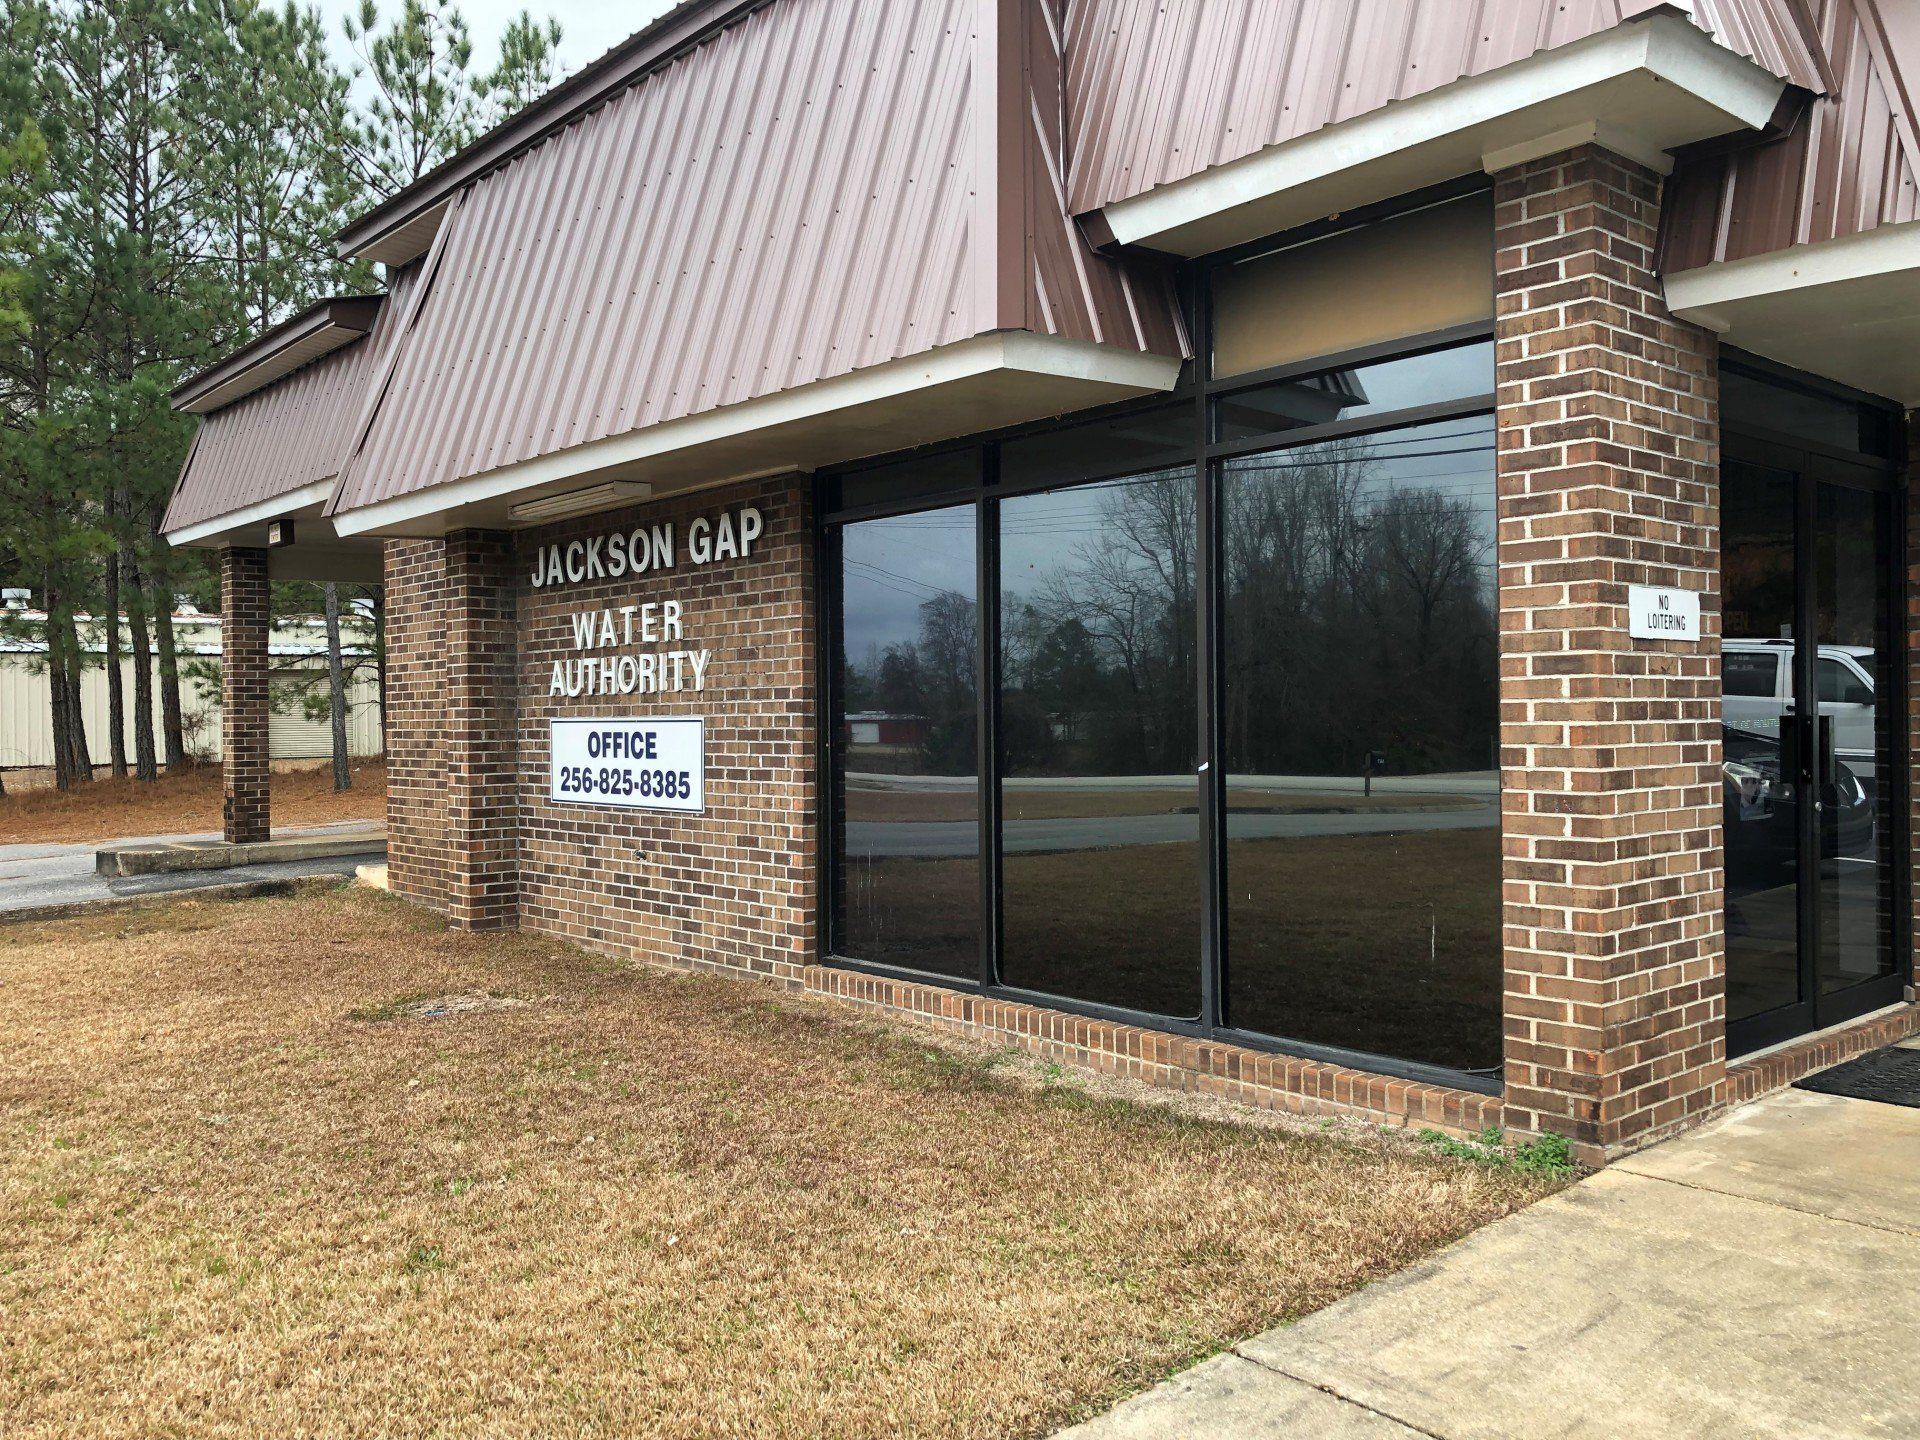 Commercial tint installation near Holtville, AL - Picture of business windows AFTER tint installation in Jackson's Gap, AL